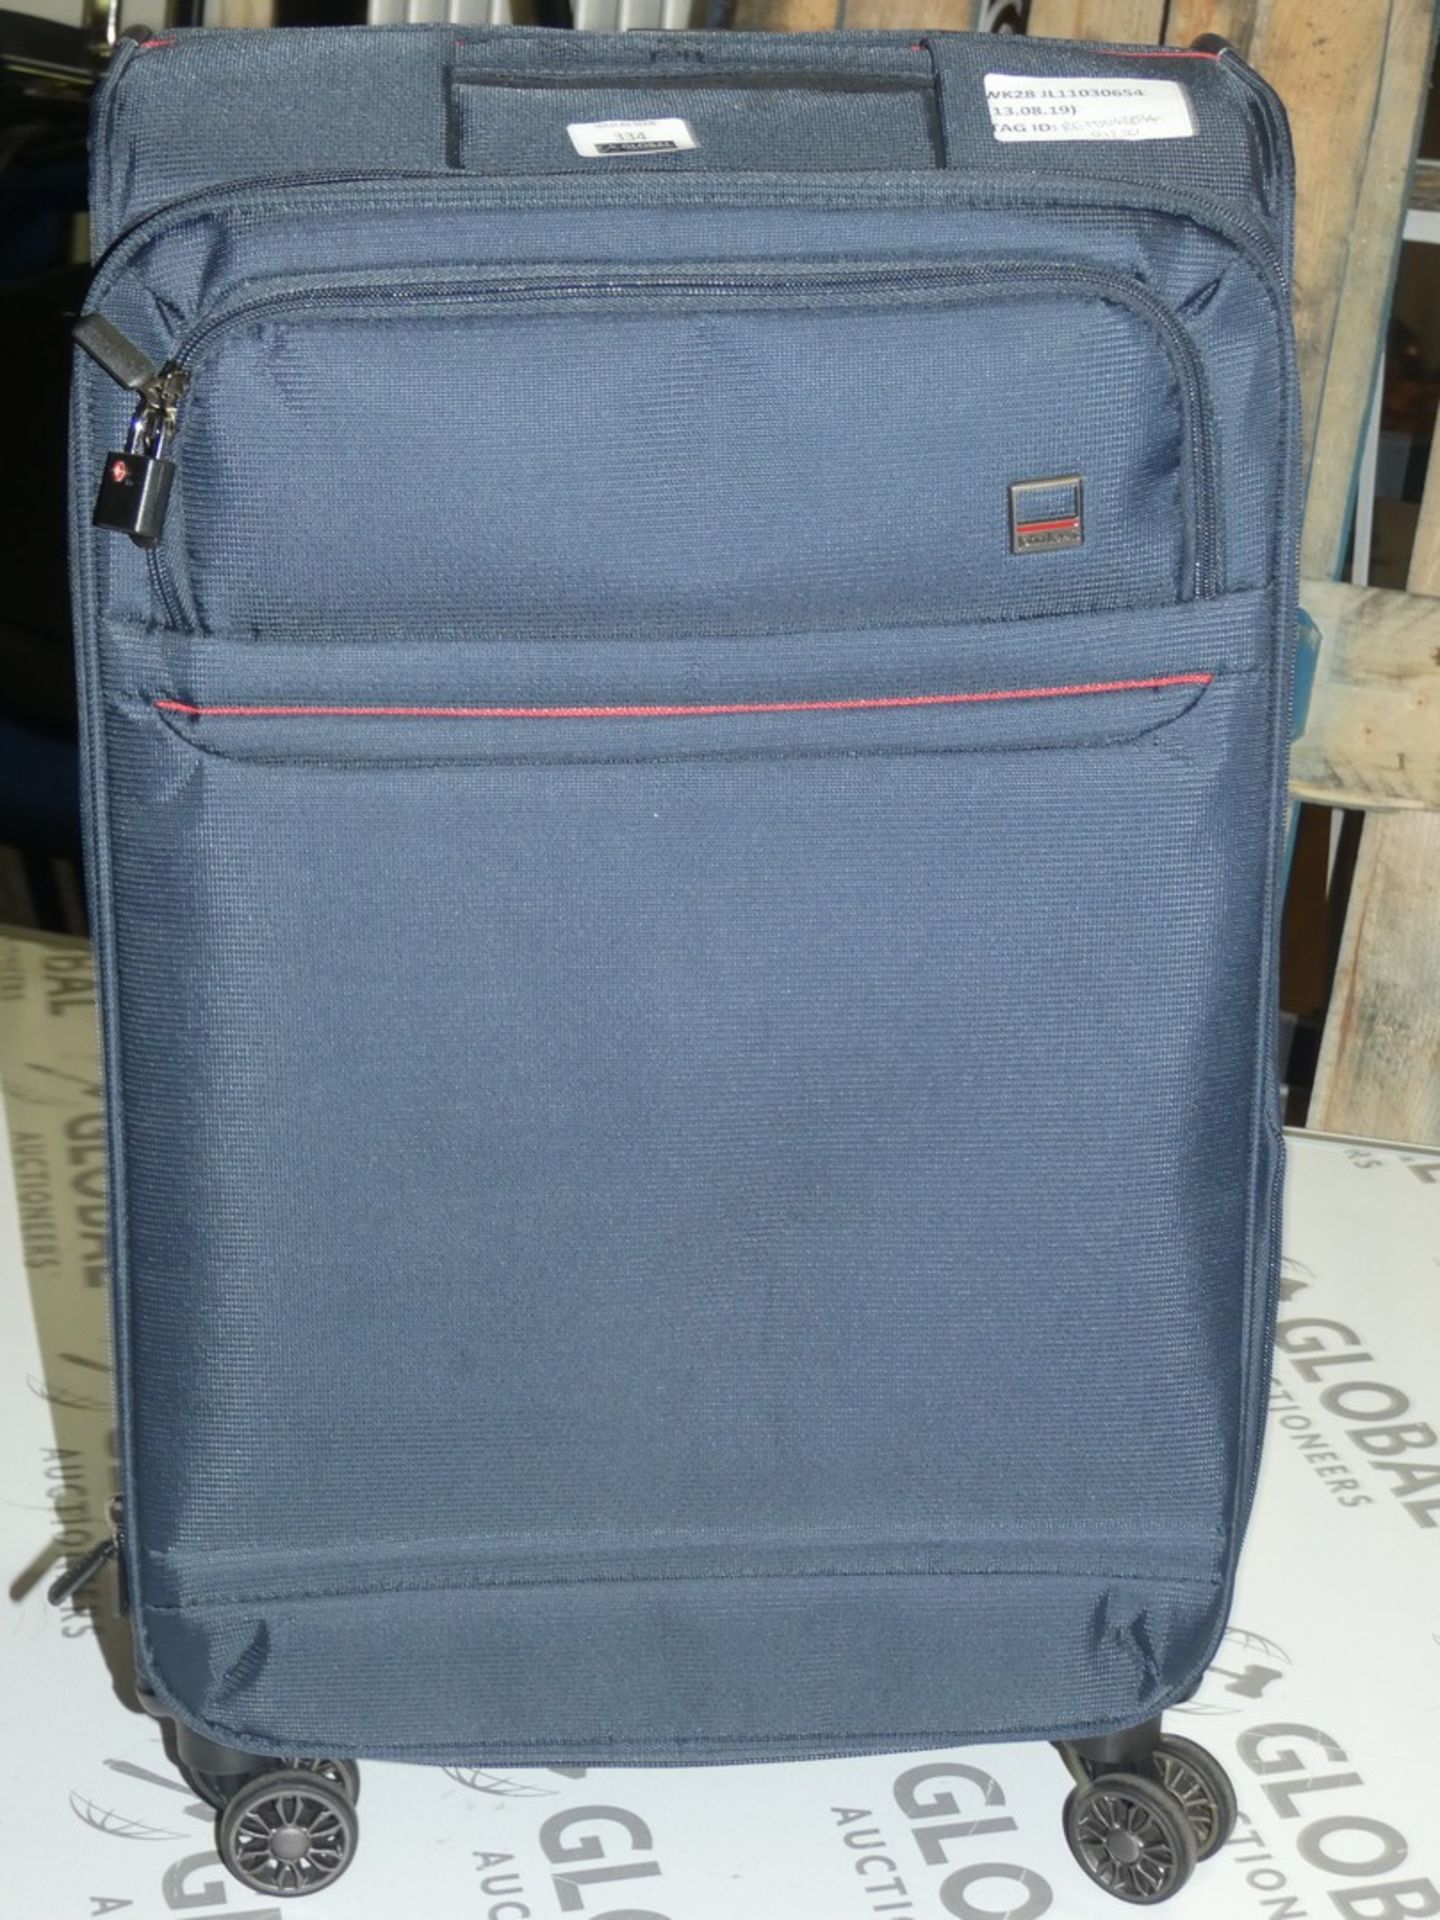 John Lewis 4 Wheel Spin Travel Suitcase RRP £125 (RET00438544) (Viewing/Appraisals Highly